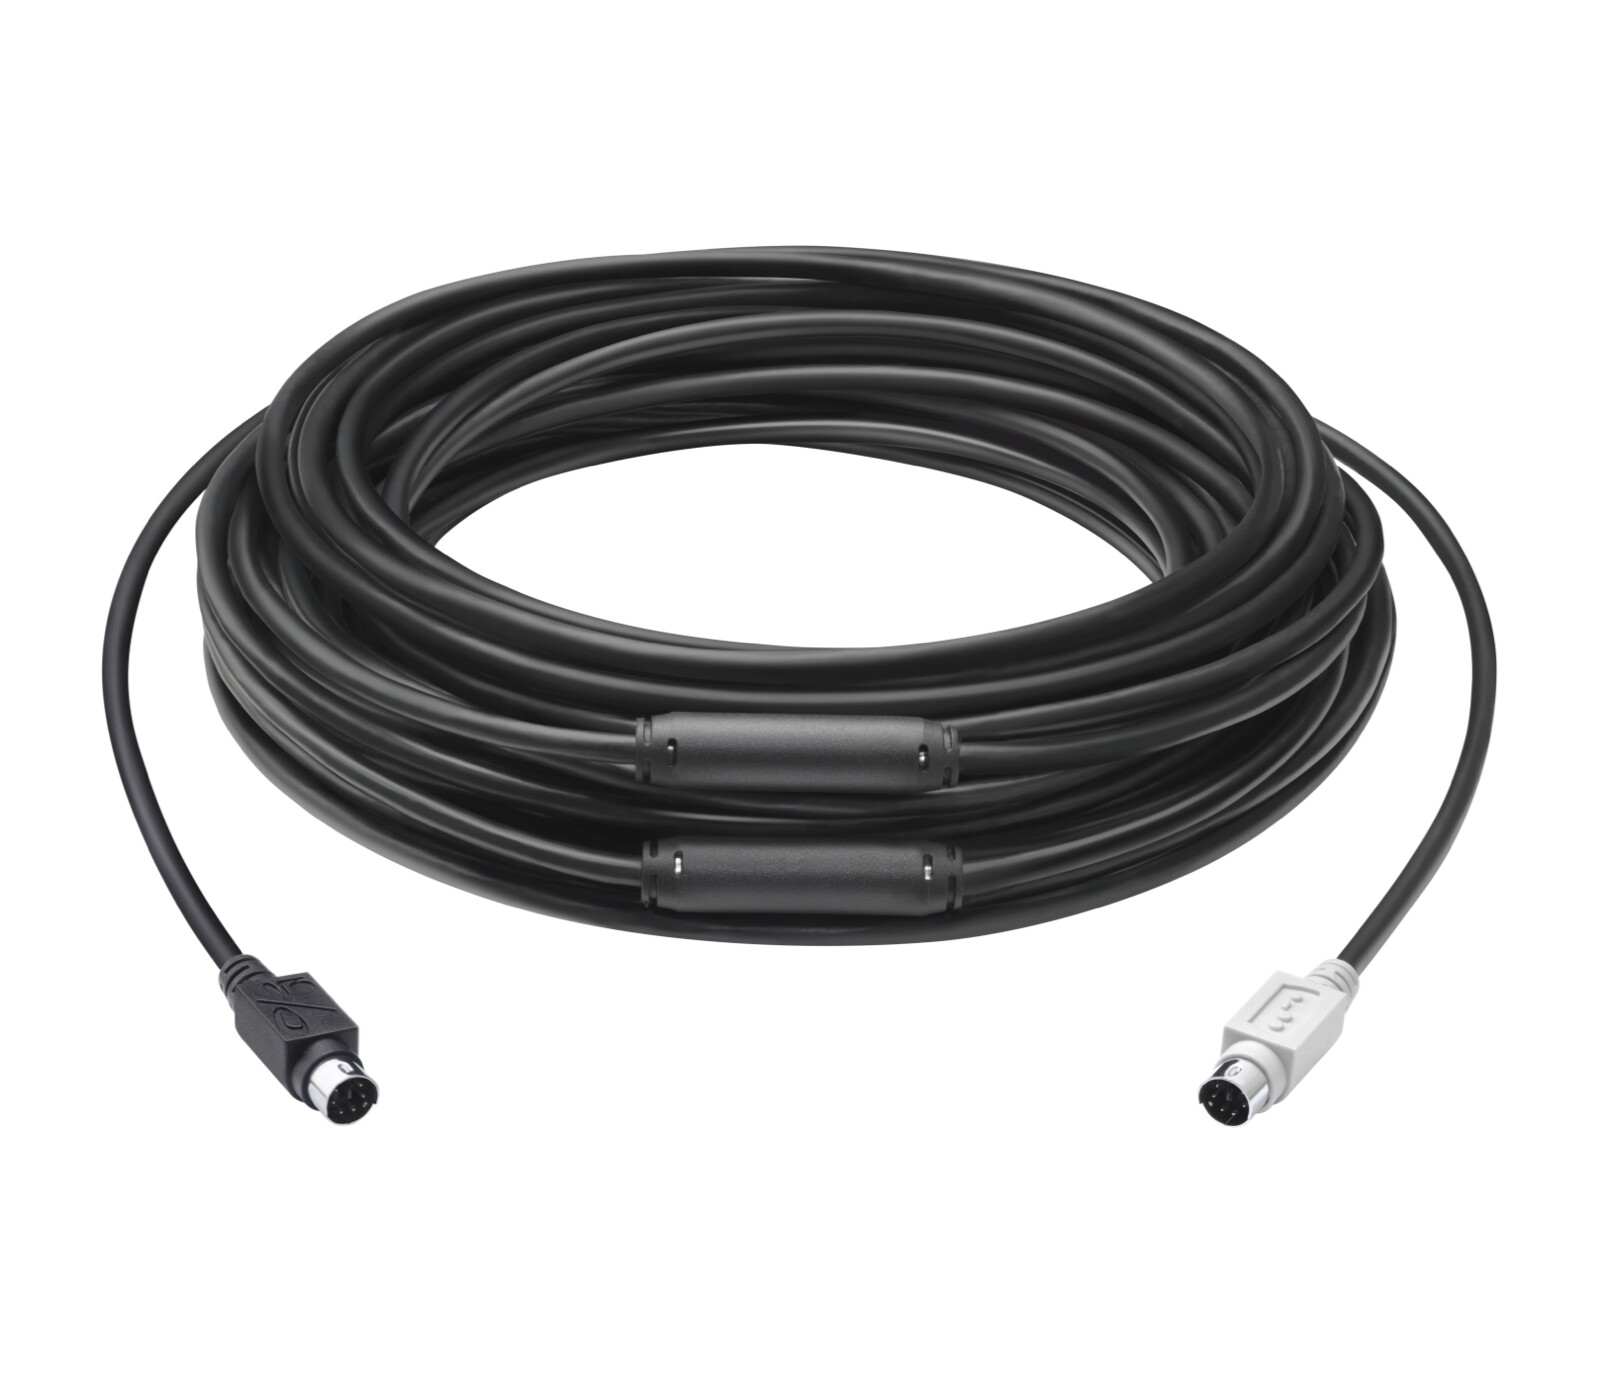 LOGITECH 15 meter Extended Cable for Logitech Group - AMR